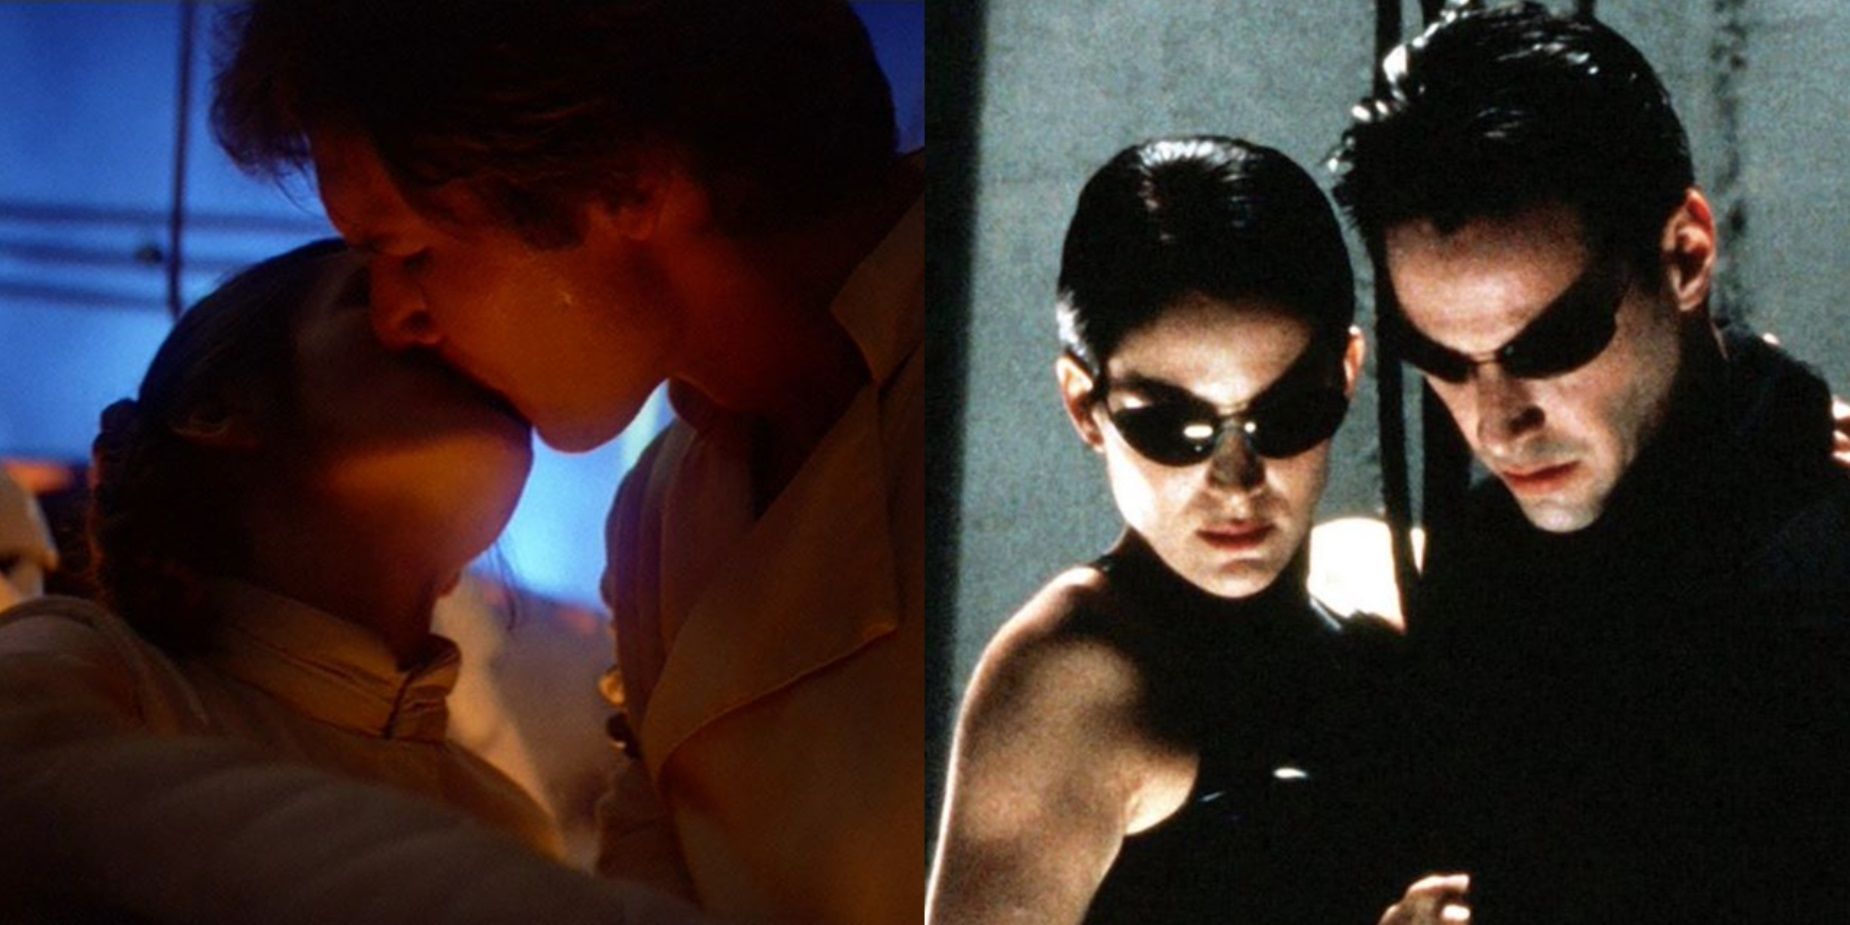 Split image of Han and Leia in The Empire Strikes Back and Neo and Trinity in The Matrix